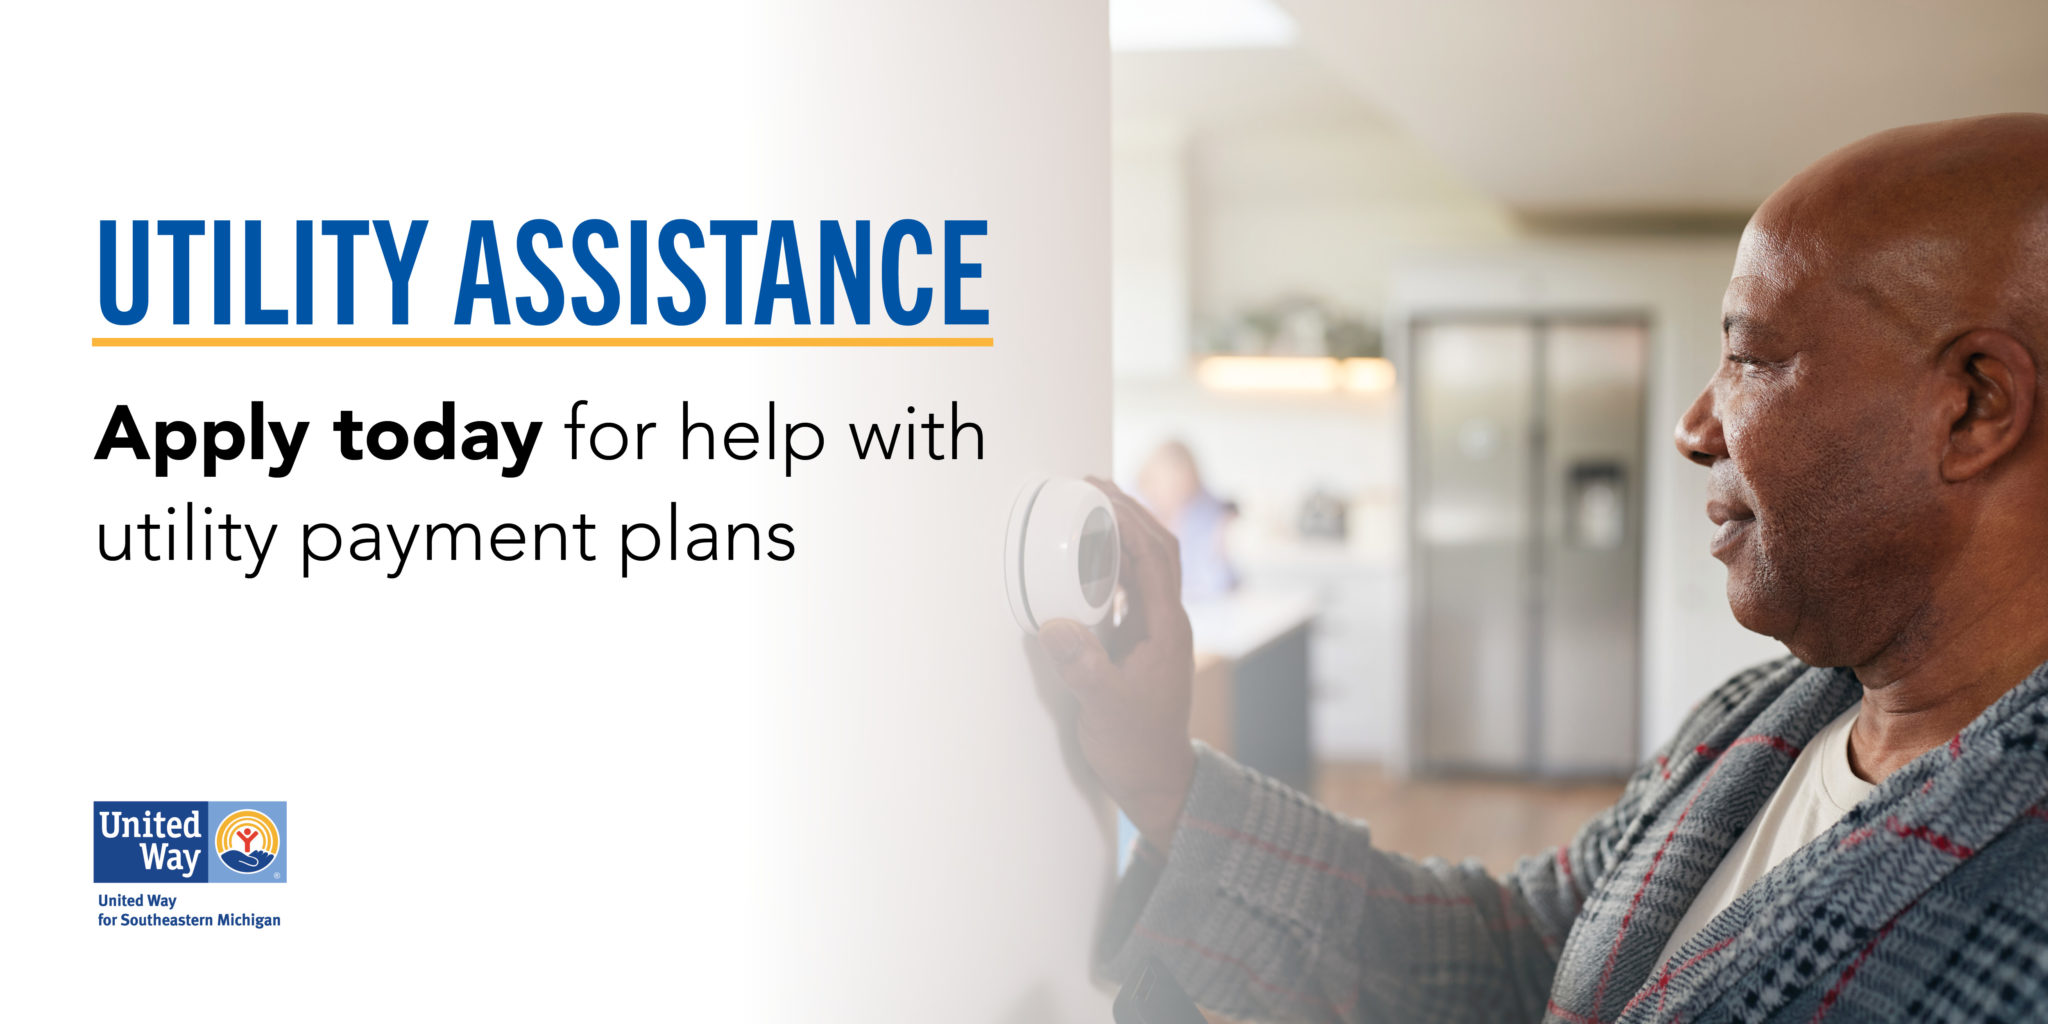 Utility Assistance United Way For Southeastern Michigan